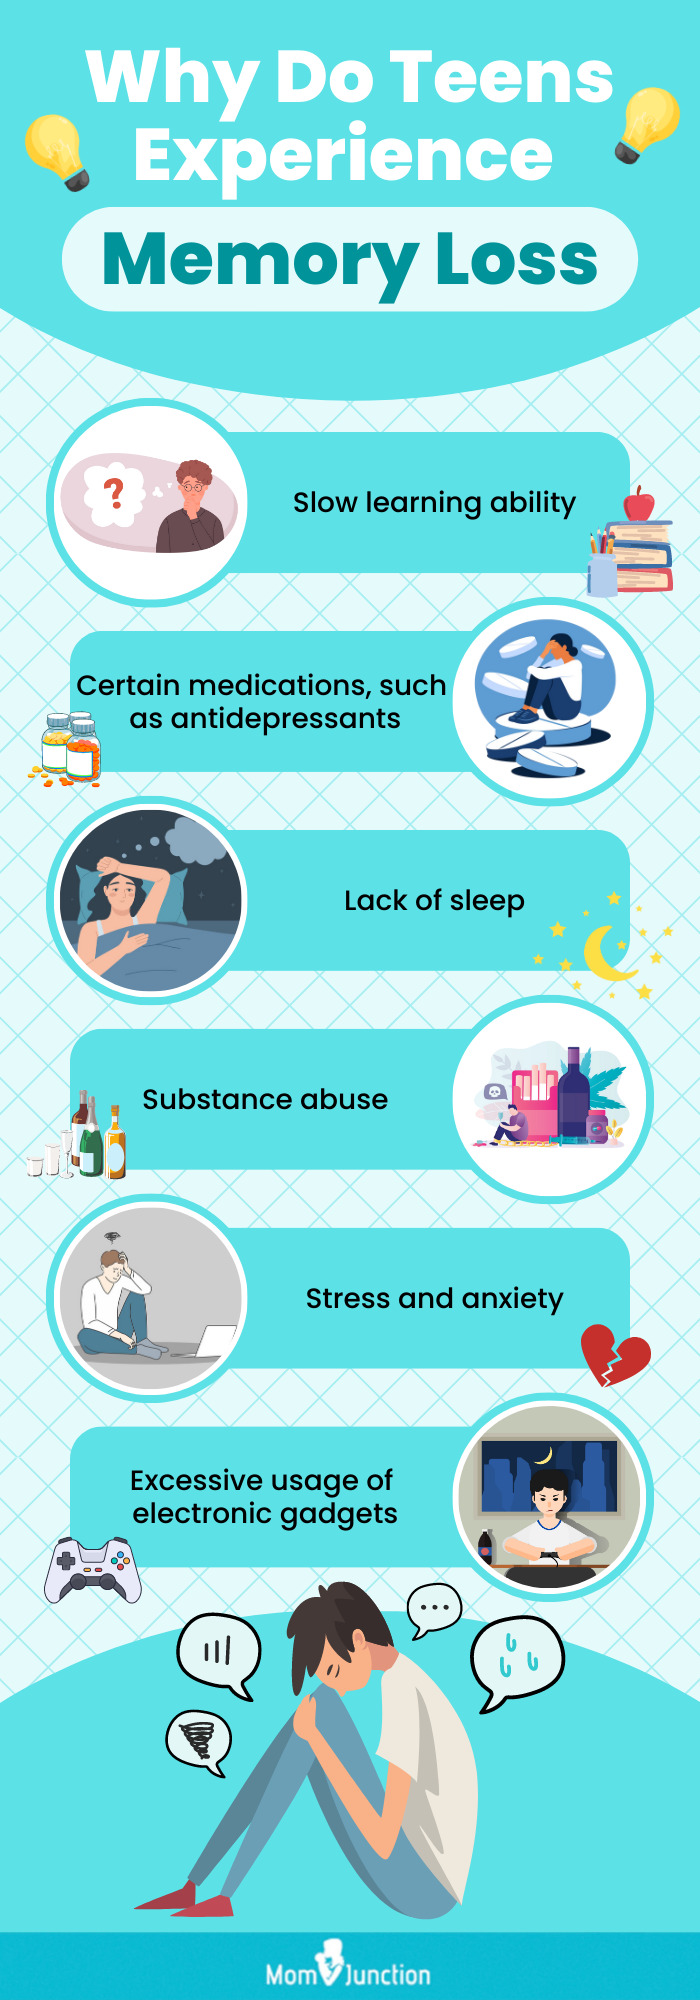 reasons for memory loss in teenagers (infographic)